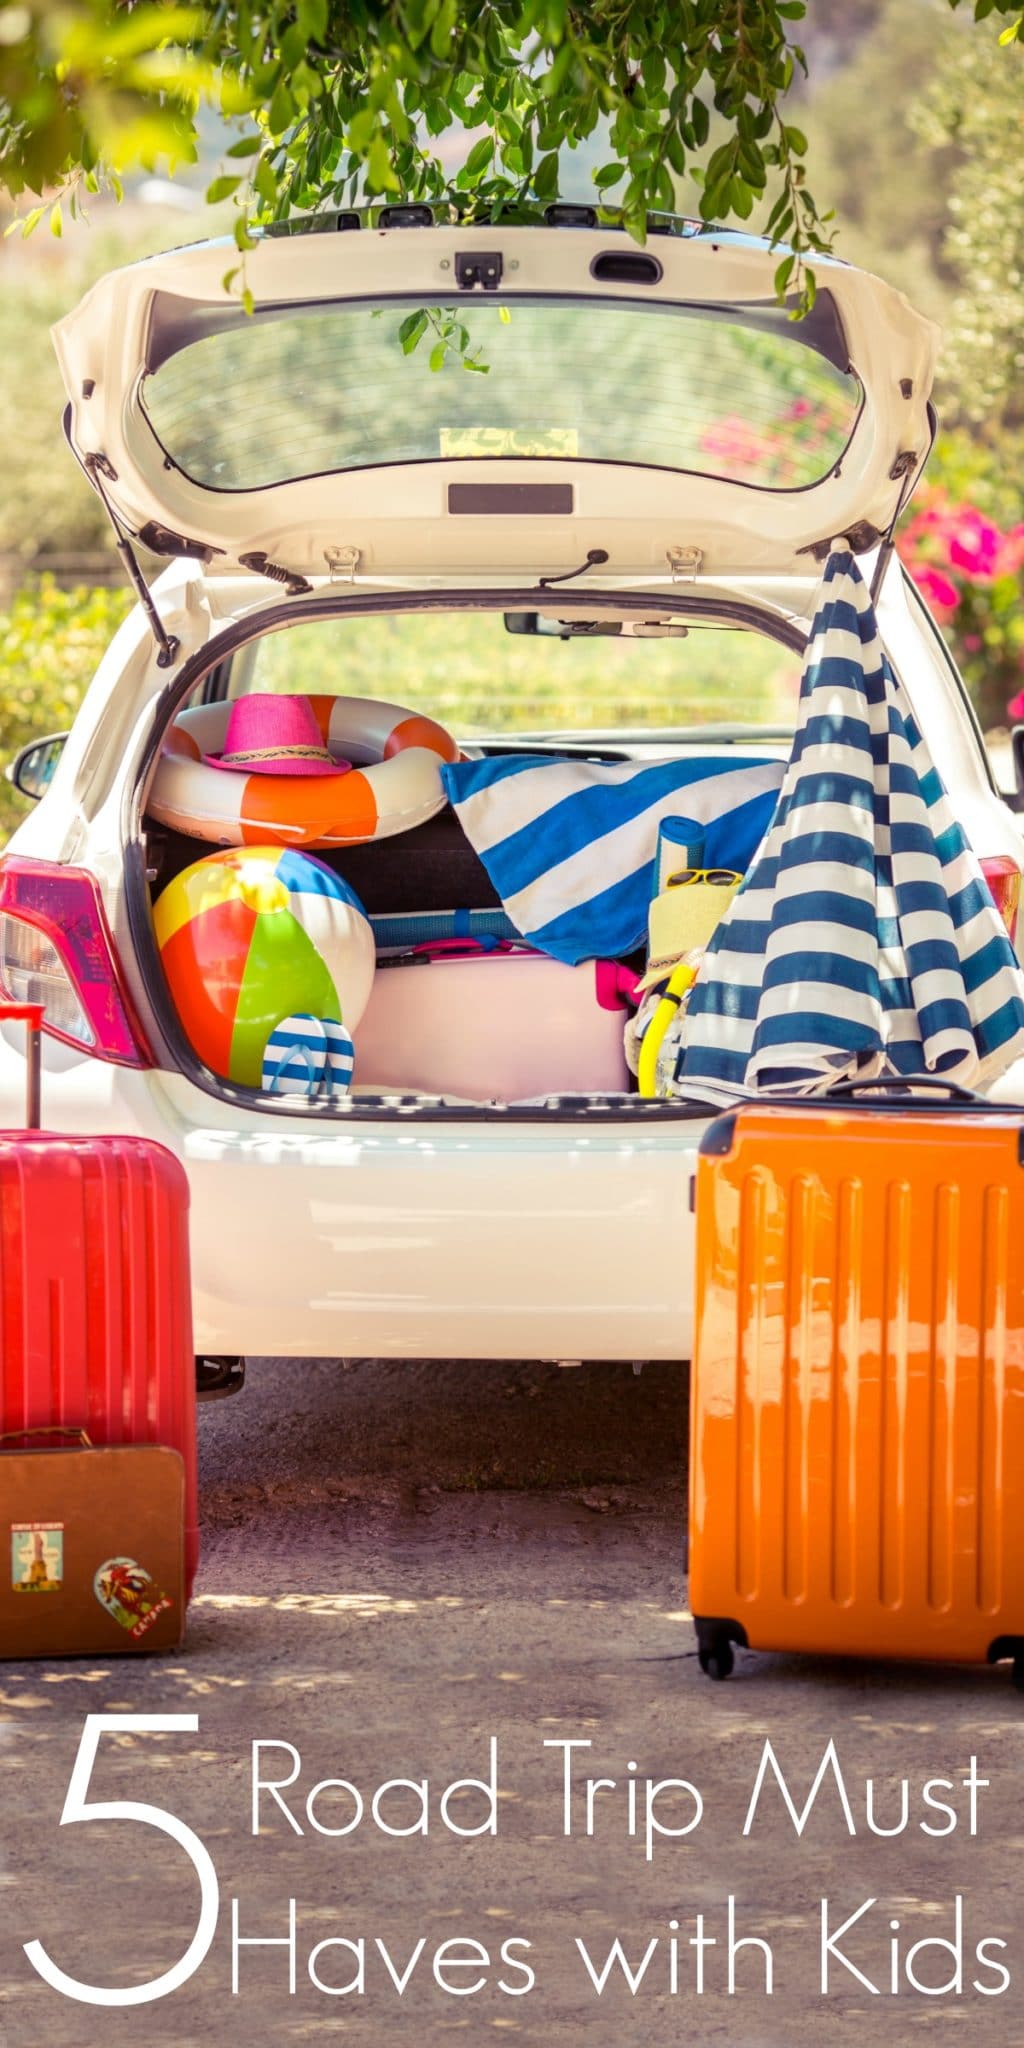 Tired of being asked, "Are we there yet?" Don't get trapped in the car without these 5 Road Trip Must Haves with Kids to Save Time and Your Sanity!